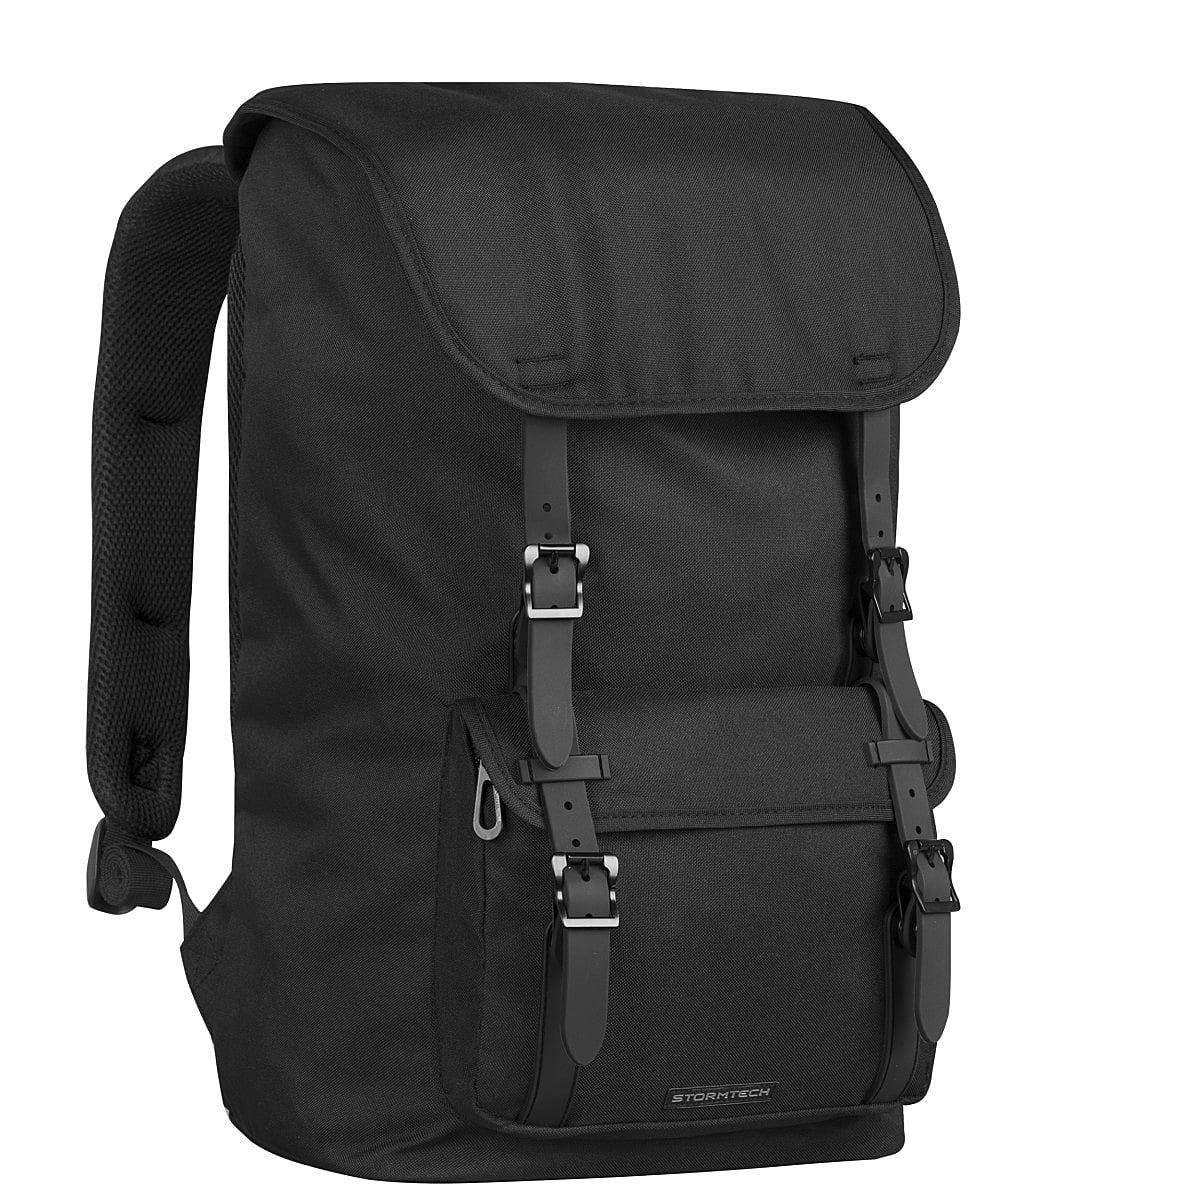 Stormtech Bags Oasis Backpack in Black (Product Code: SPT-1)